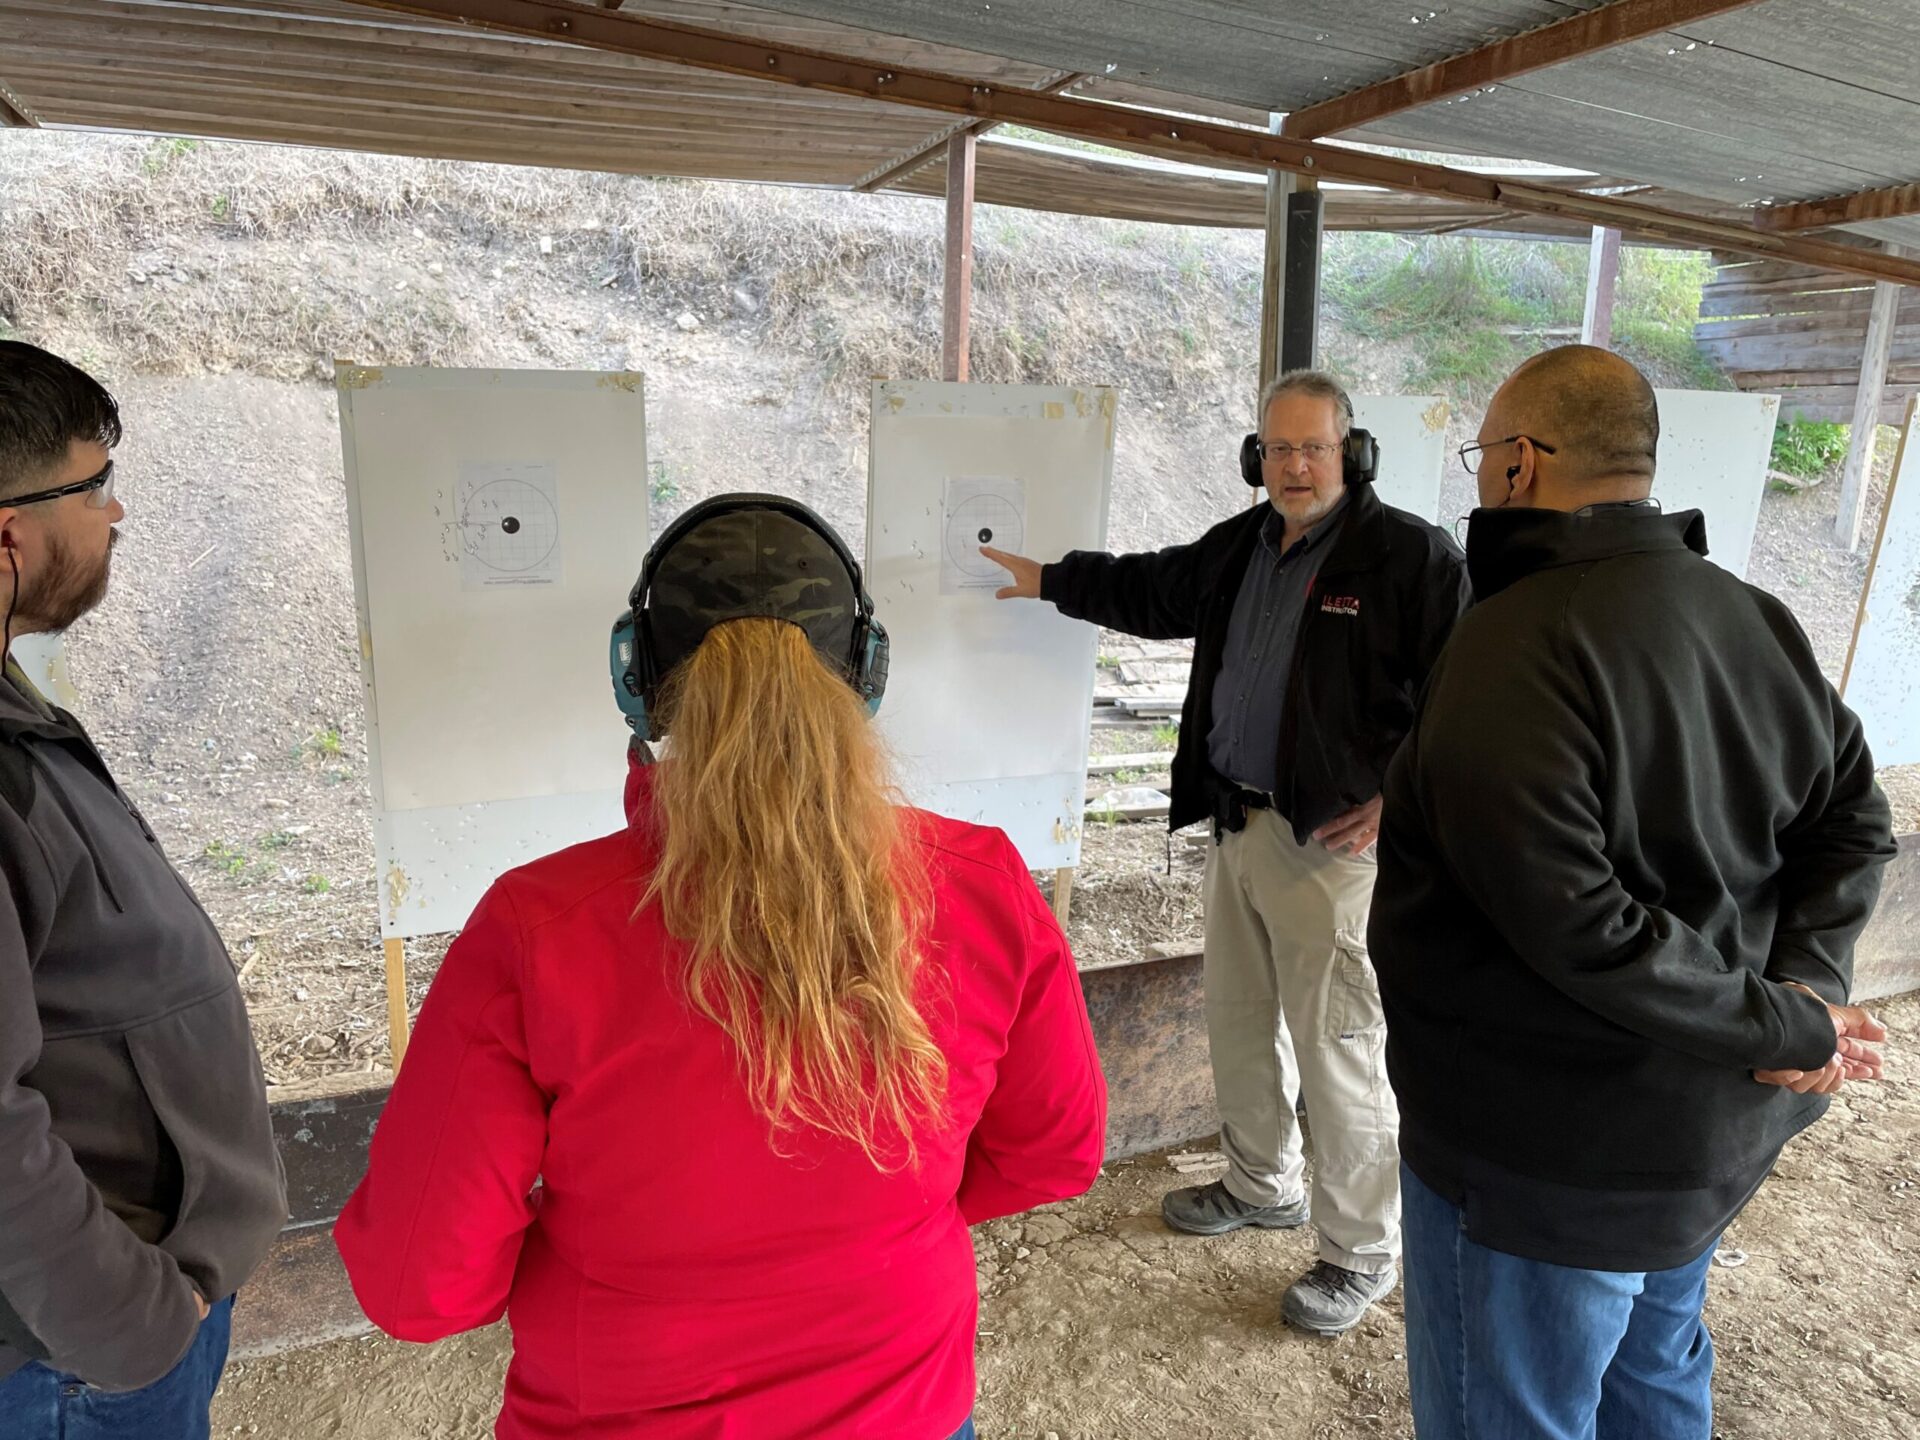 Basic Pistol Instructor with Ken Lewis formally with National Protective Services Institute also known as NPSI Training and currently with Prevent Prepare Protect Training and Consulting P3TC